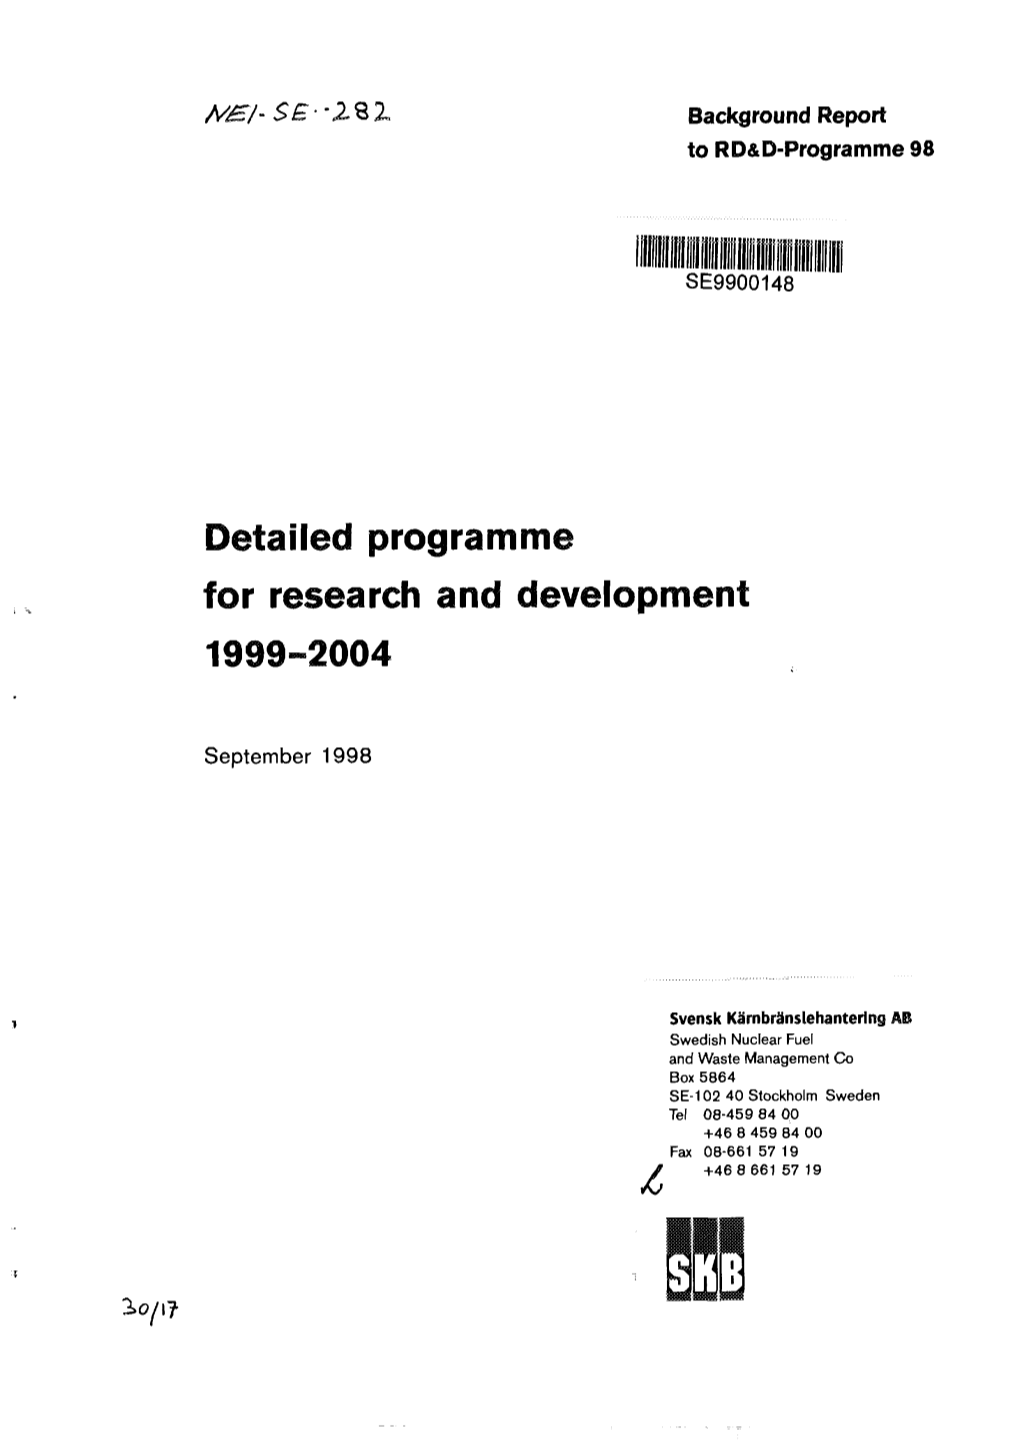 Detailed Programme for Research and Development 1999-2004